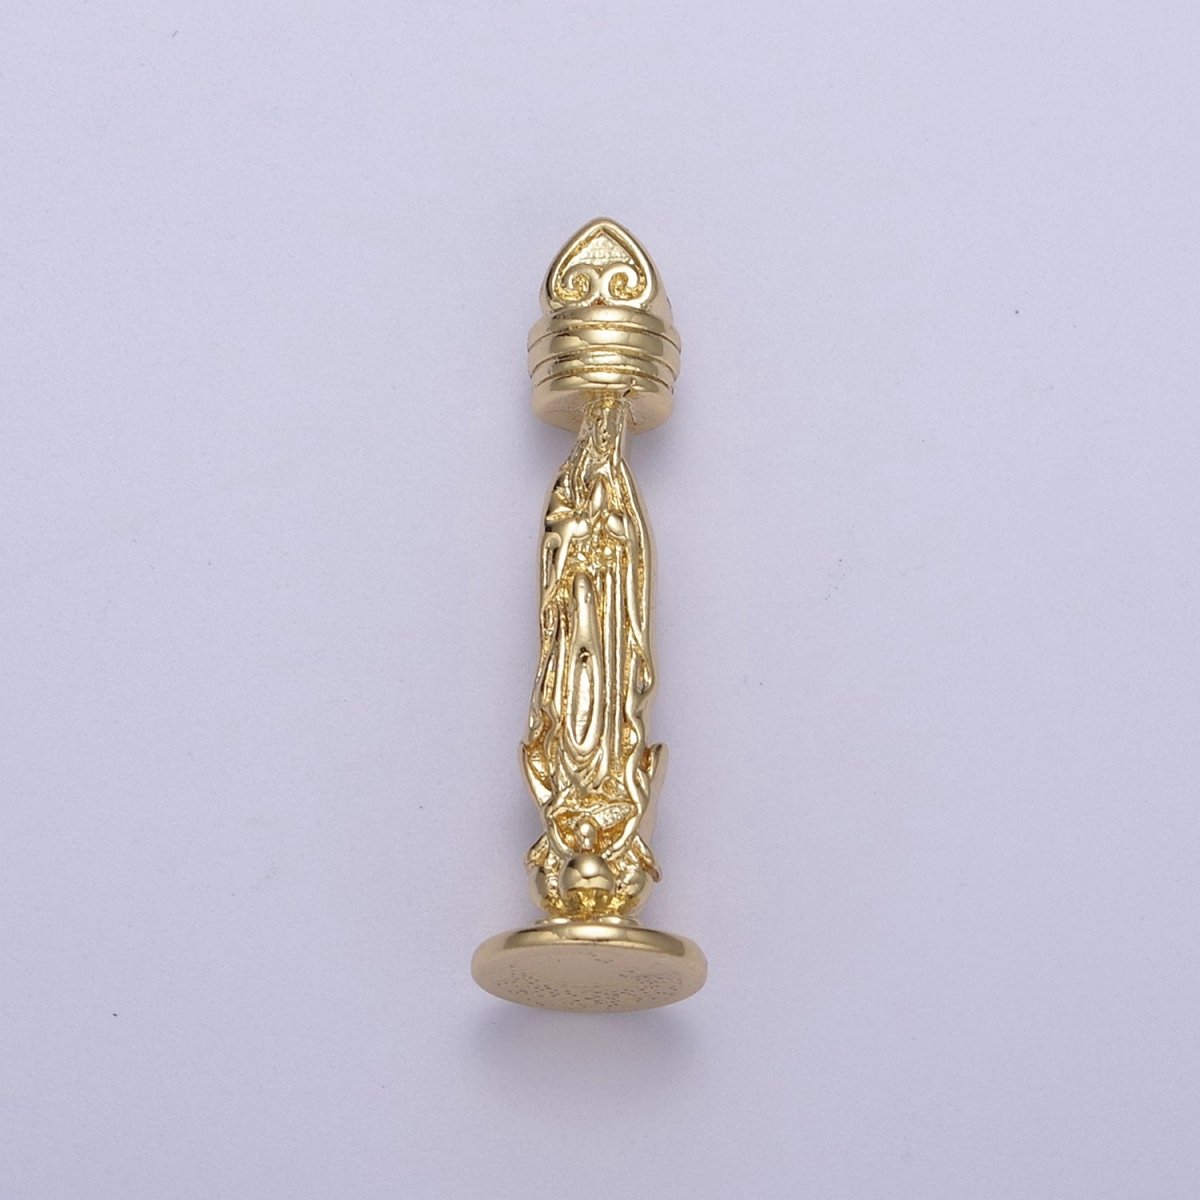 Gold Virgin Mary statue Charm Religious praying Pendant for Necklace rosary Figurine Catholic Jewelry N-628 - DLUXCA